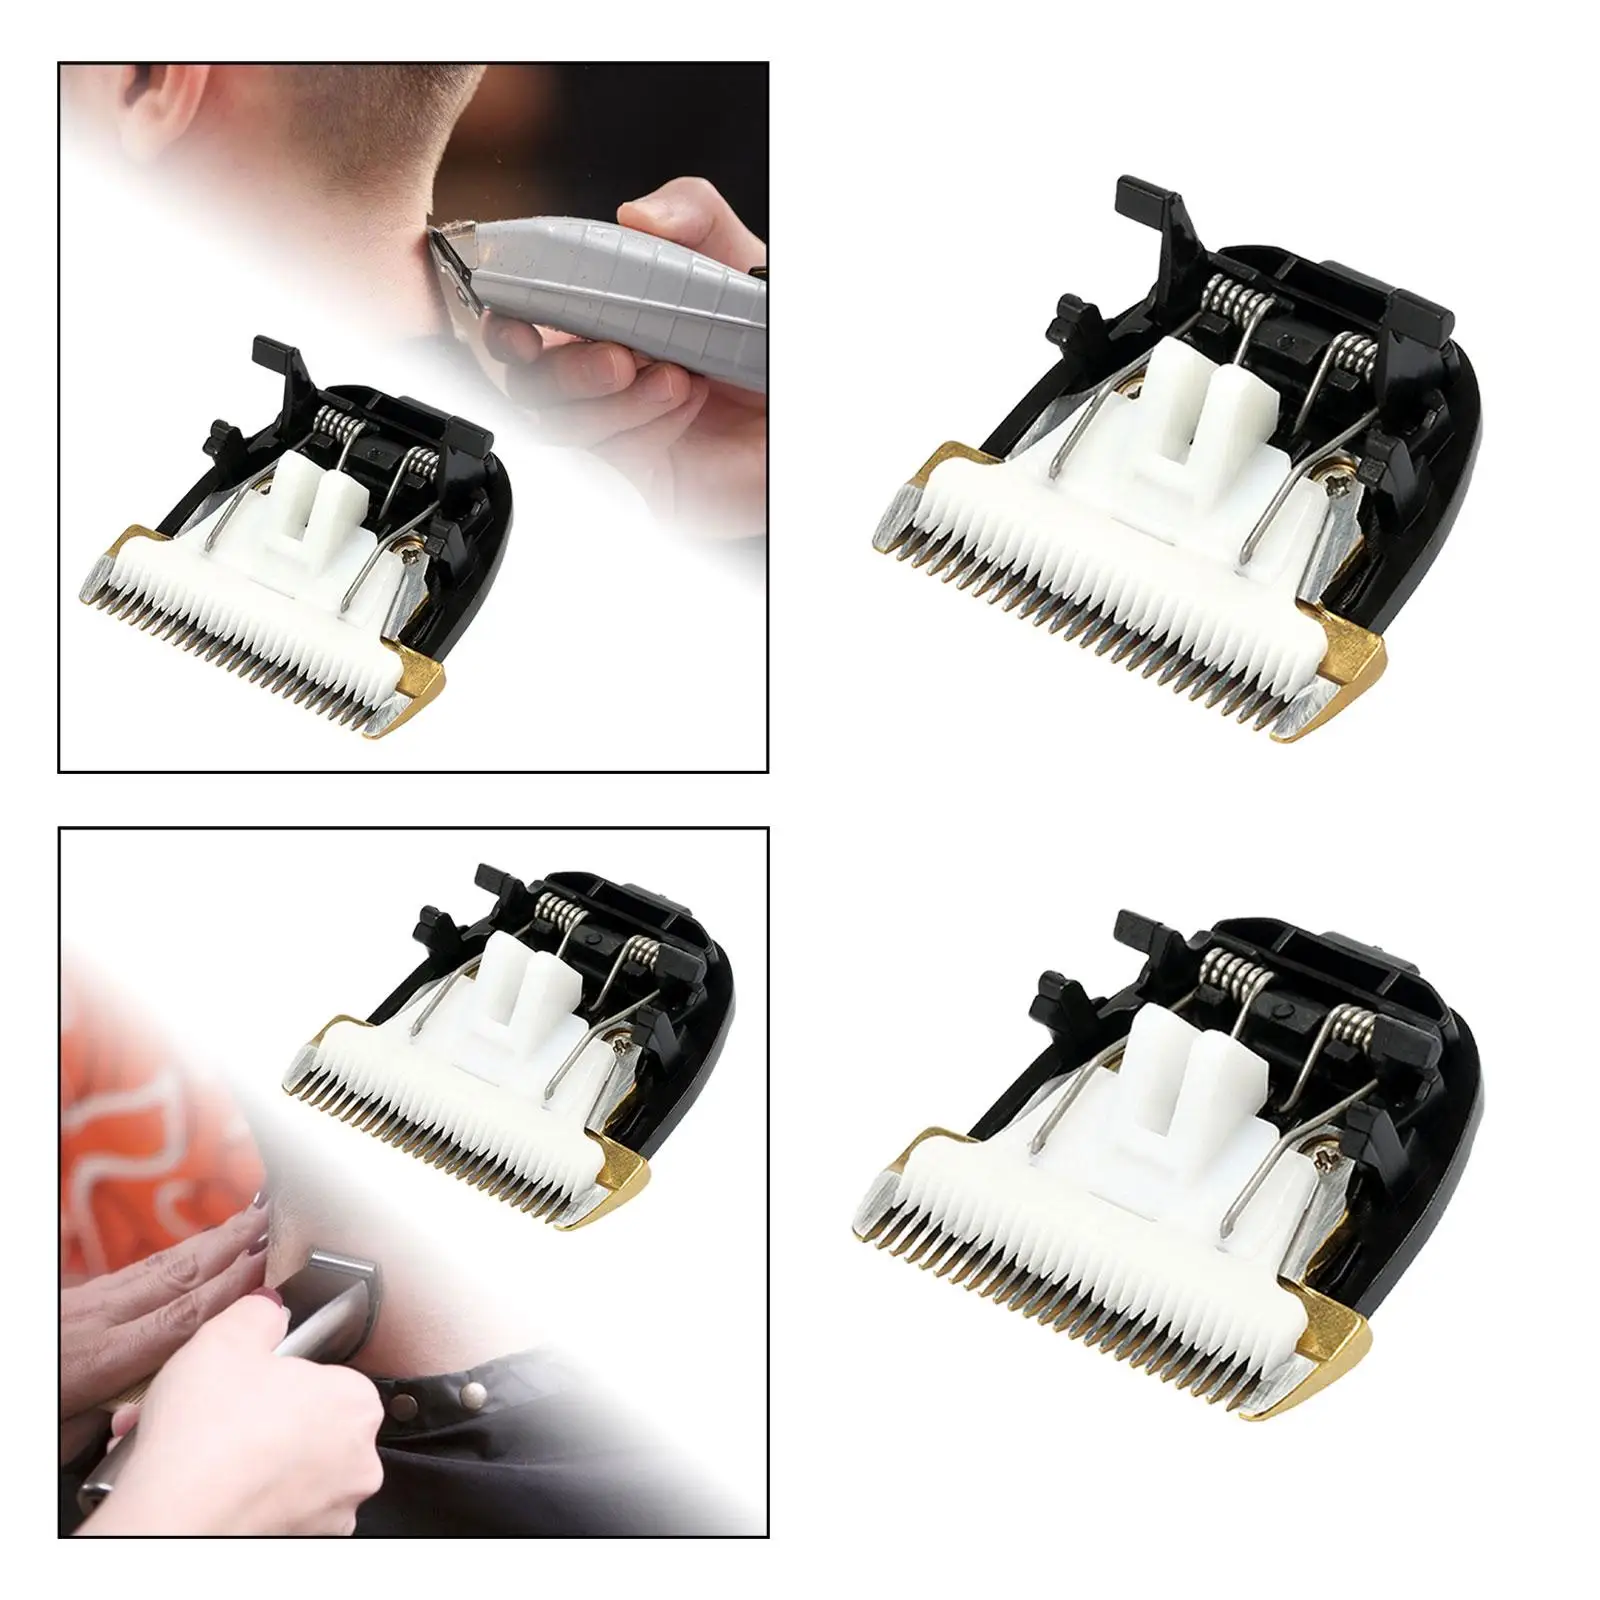 Blade  24 Tooth Hair Grooming Hair Trimmer Blade Shear Ceramics Blade Heads Replacement Accessories for Home Barber